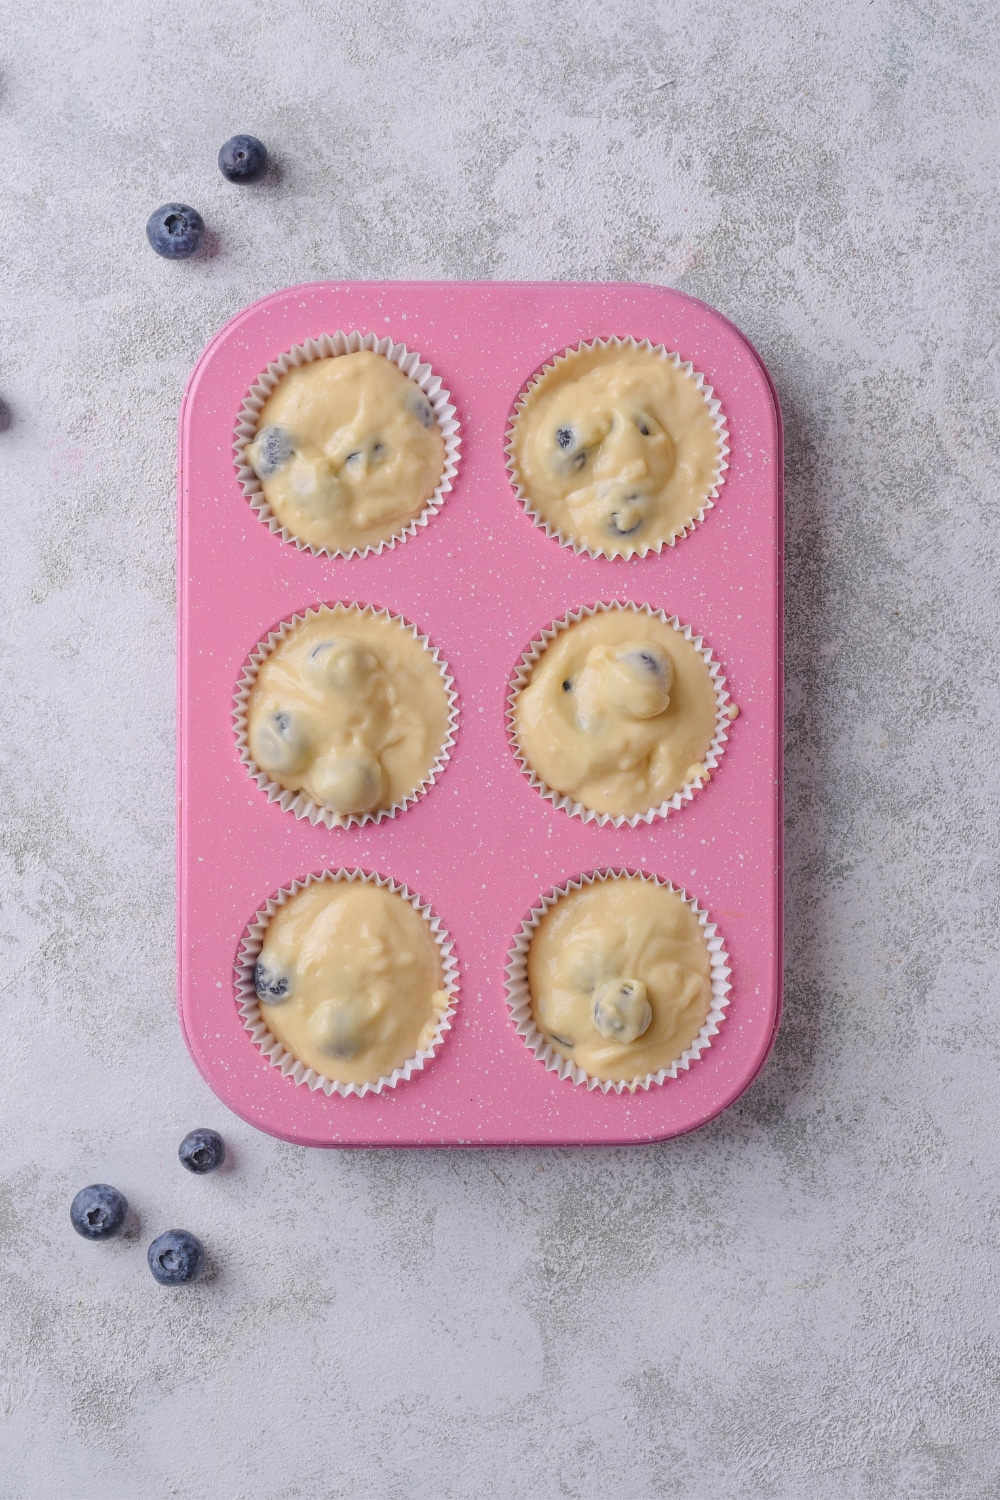 A pink muffin pan with six muffin liners filled with batter. The pan in on of a marble countertop.